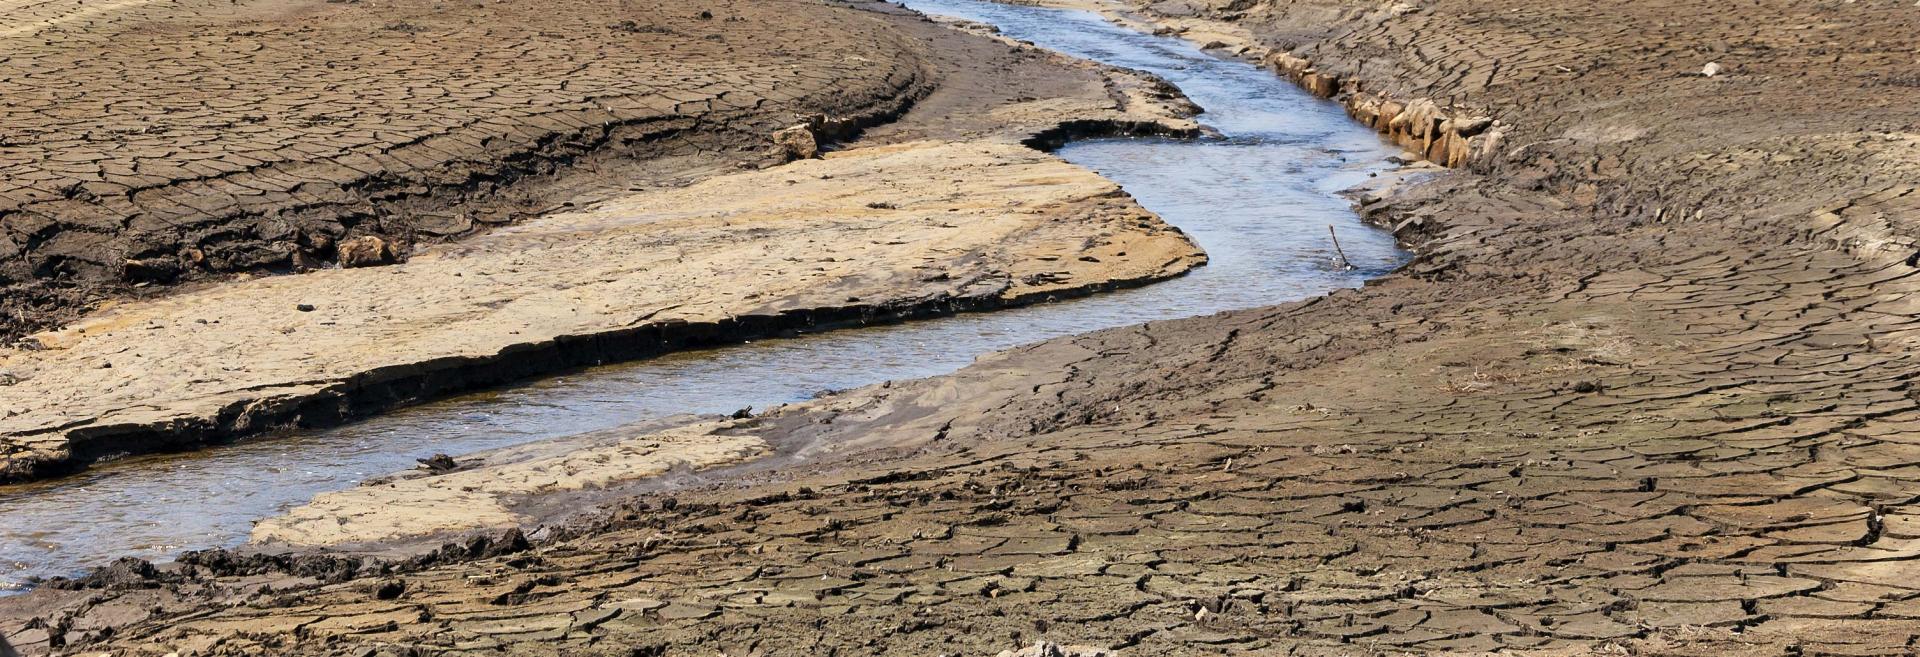 A river with dried and cracked soil